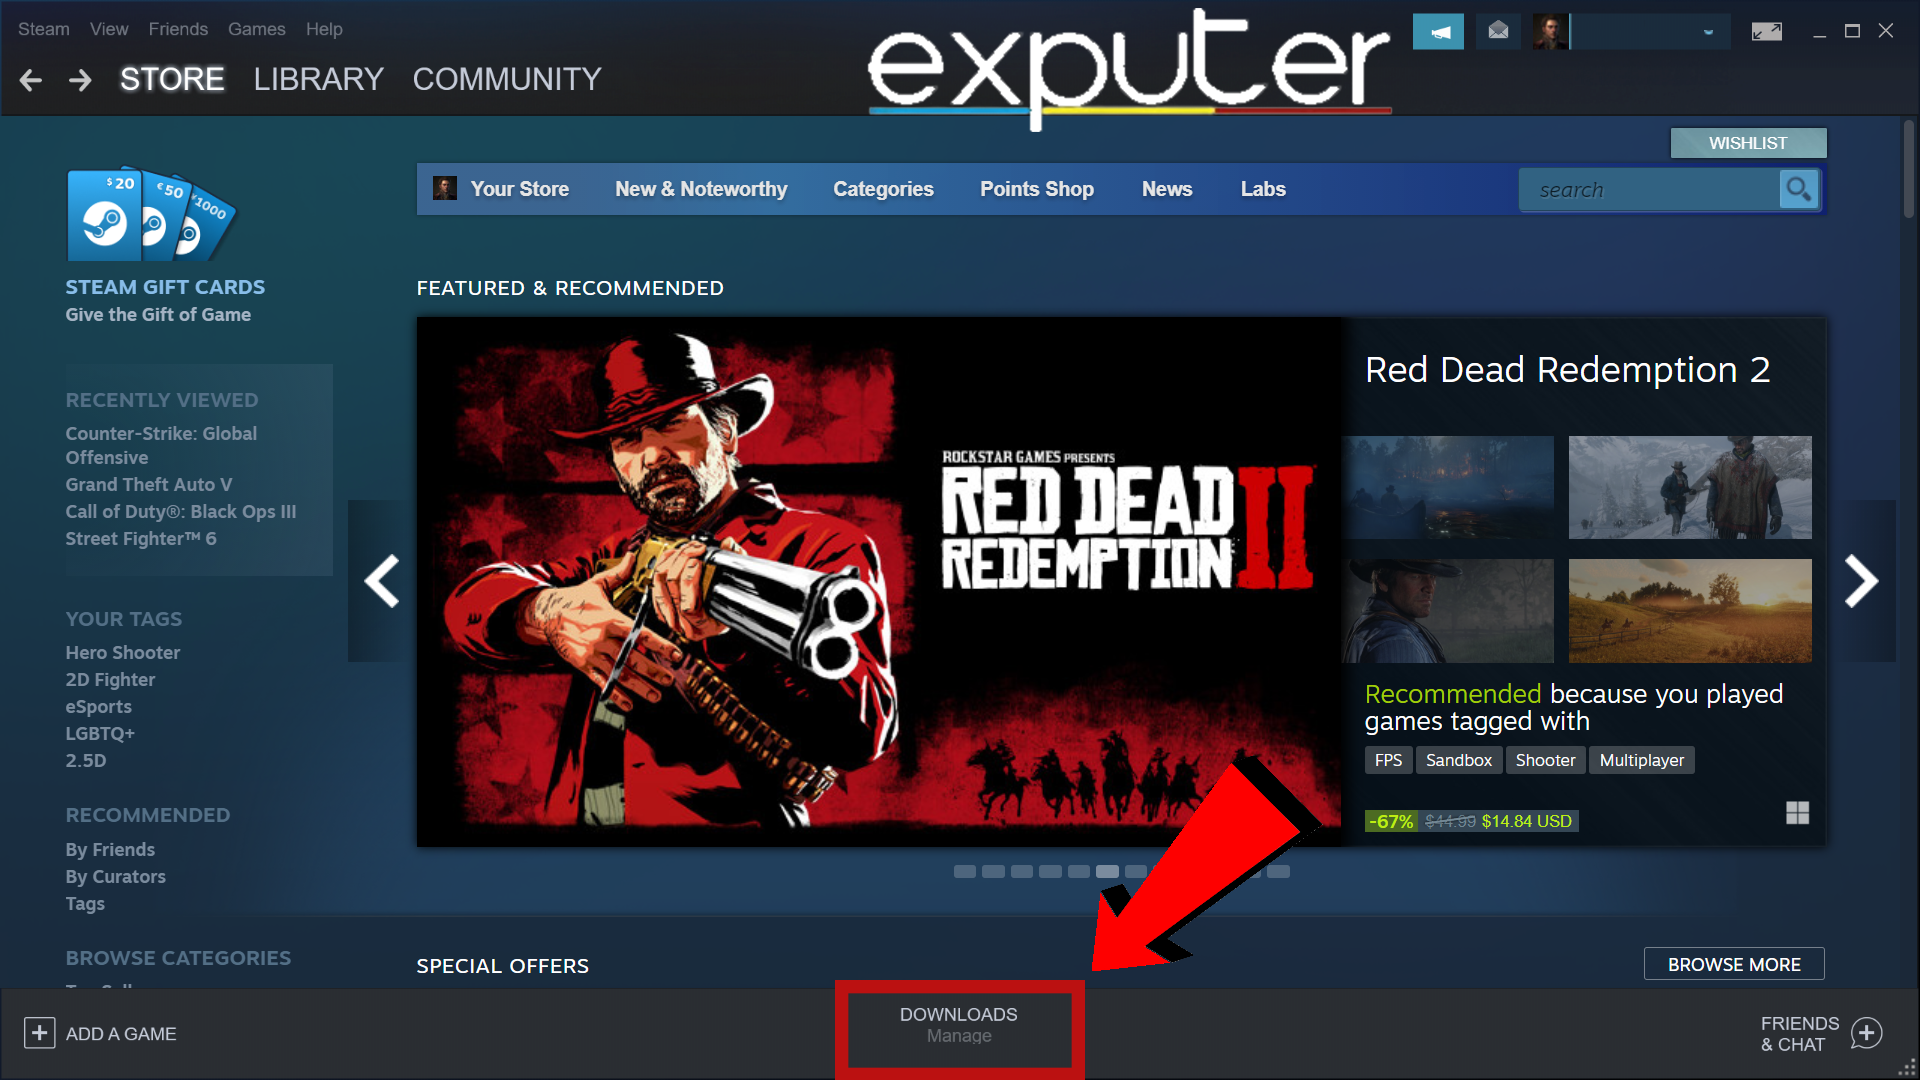 Opening Download Section in Steam. (image by eXputer)